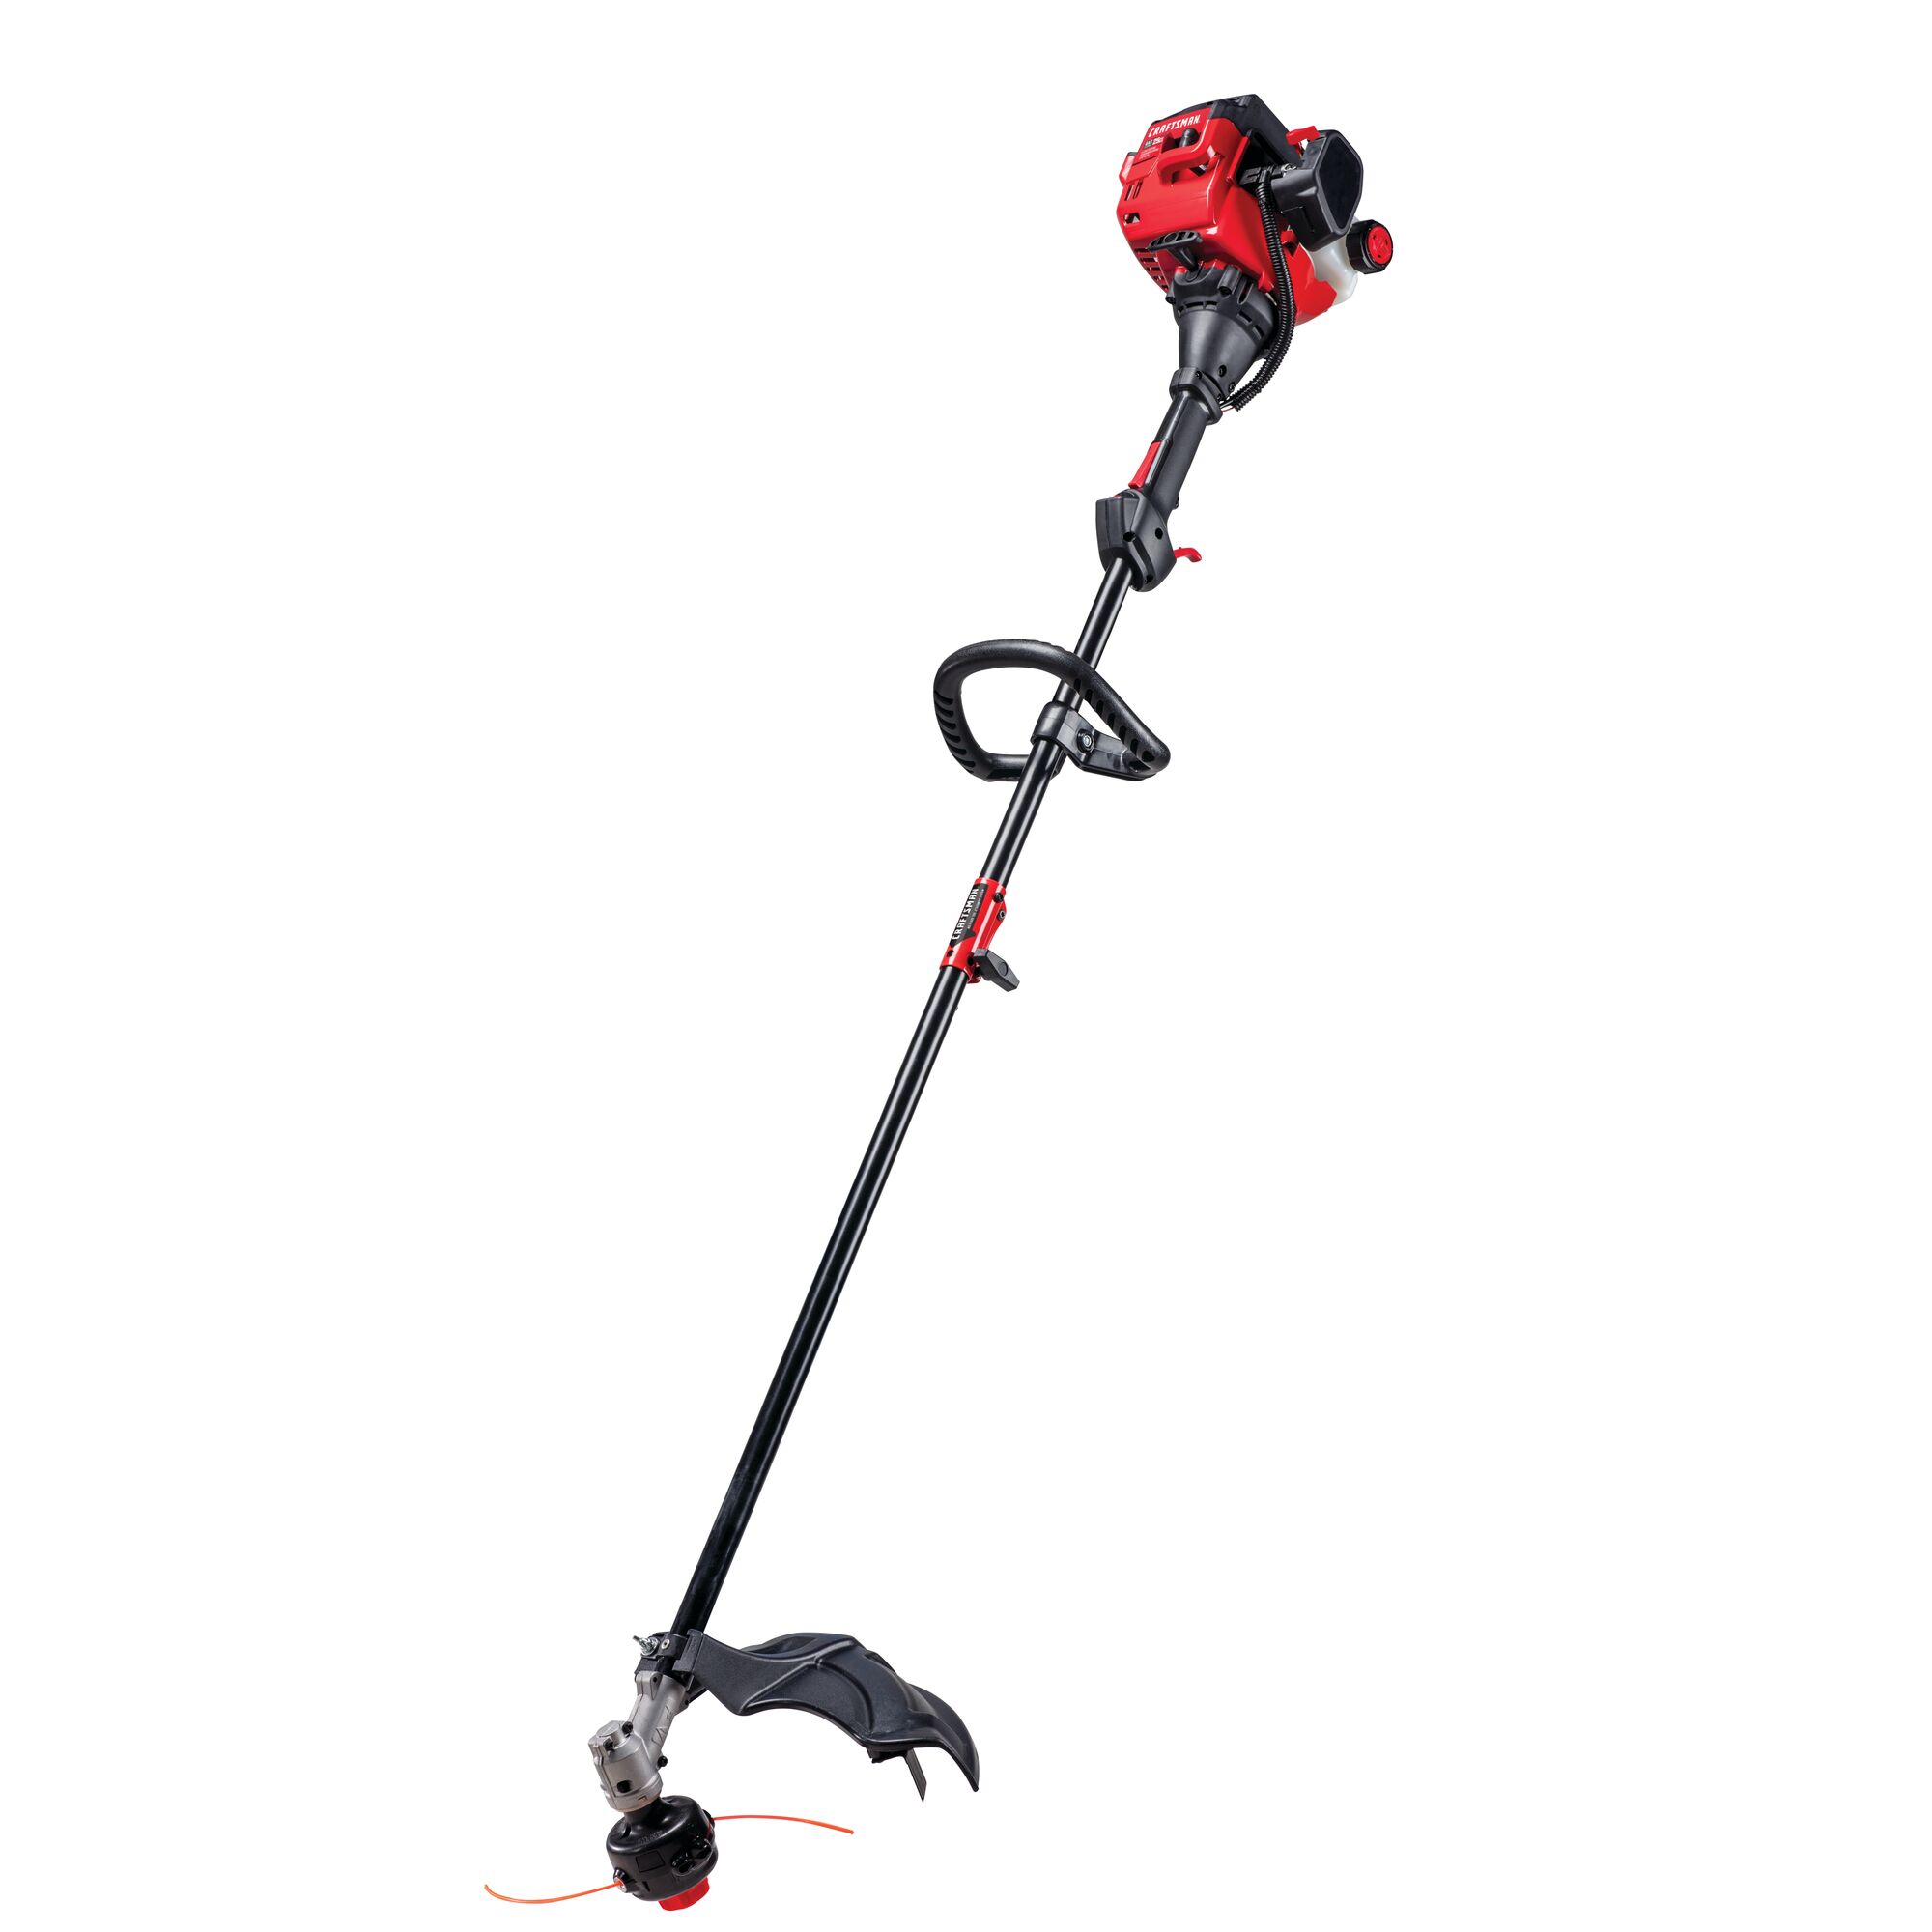 2 Cycle 17 inch straight shaft gas weedwacker trimmer.